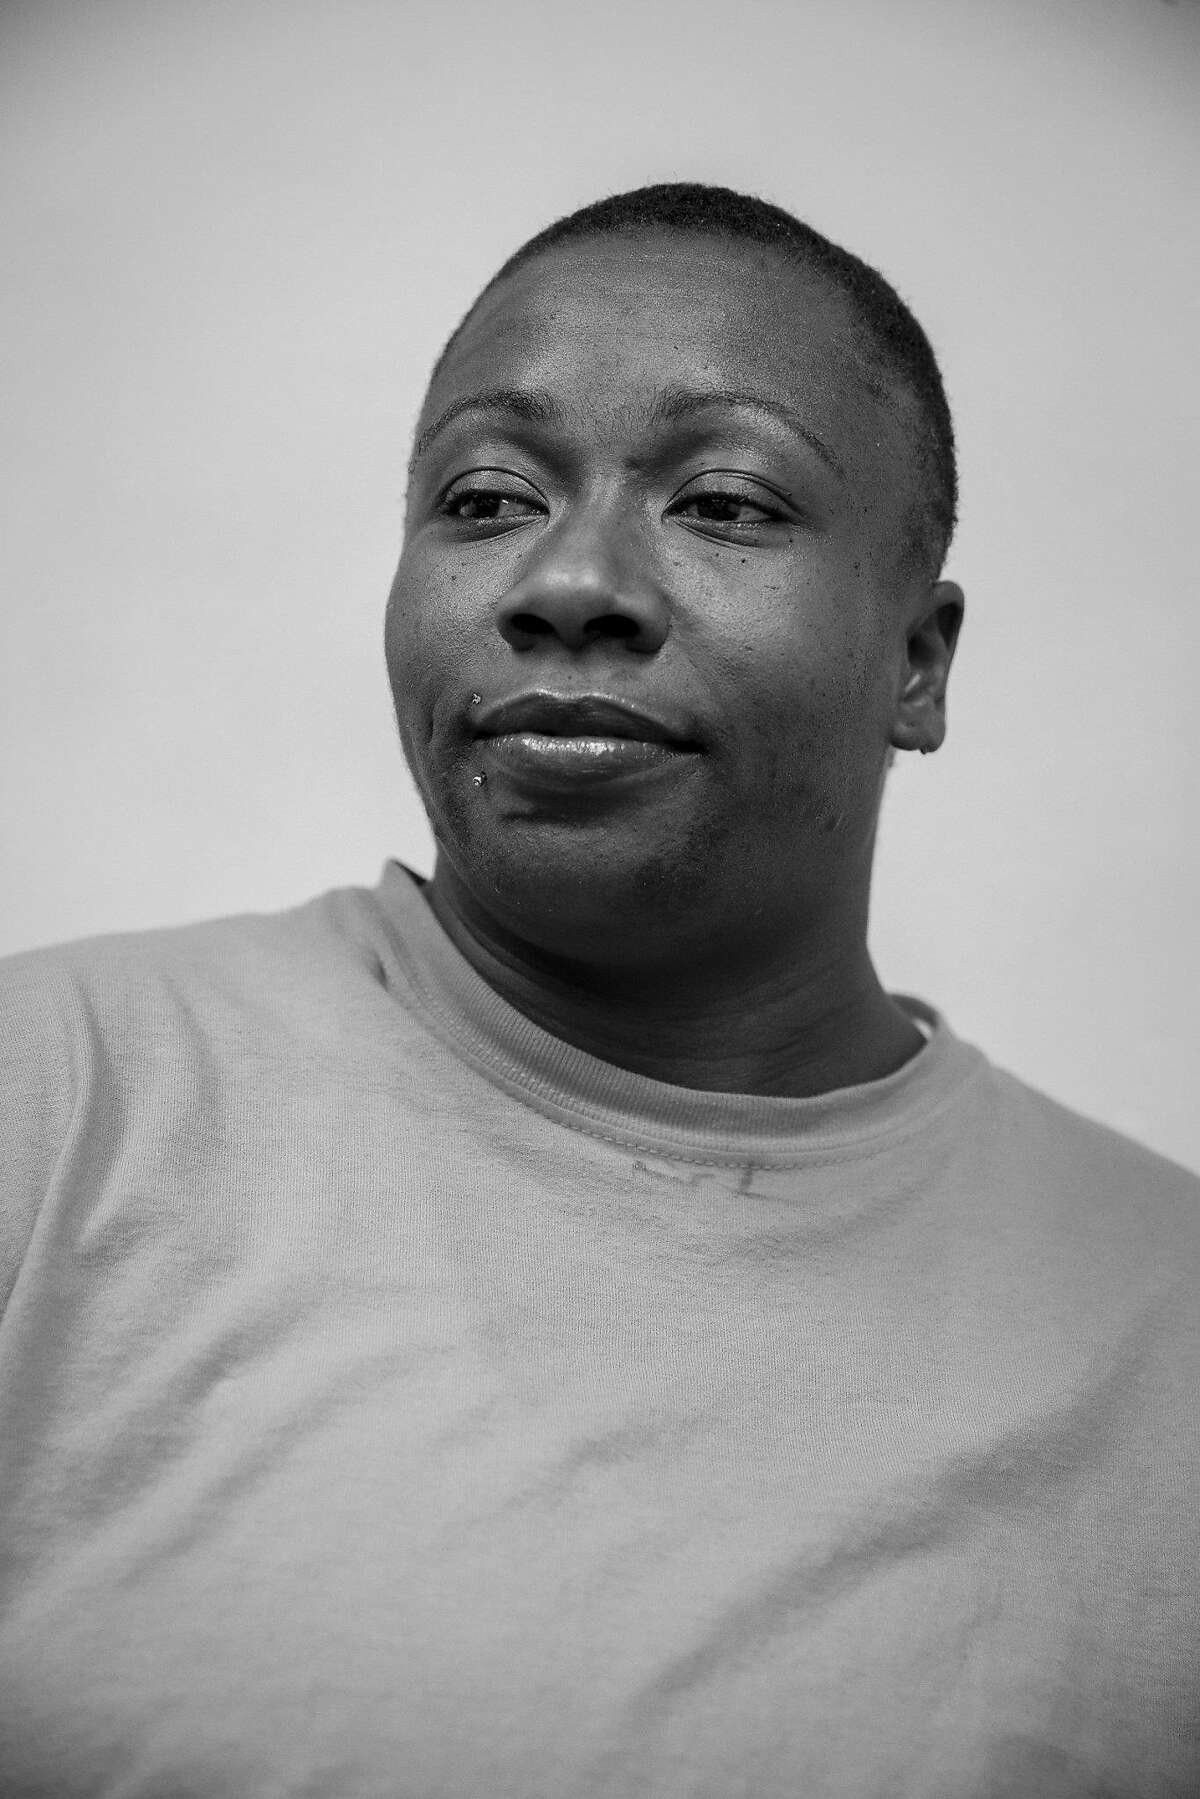 For a decade, Robert Gumpert has been taking portraits and recording stories of the inmates in the San Francisco jail system. 11 December 2015: San Francisco, CA. SF CJ 2: Tameika Smith. Story: 5 poems. Audio